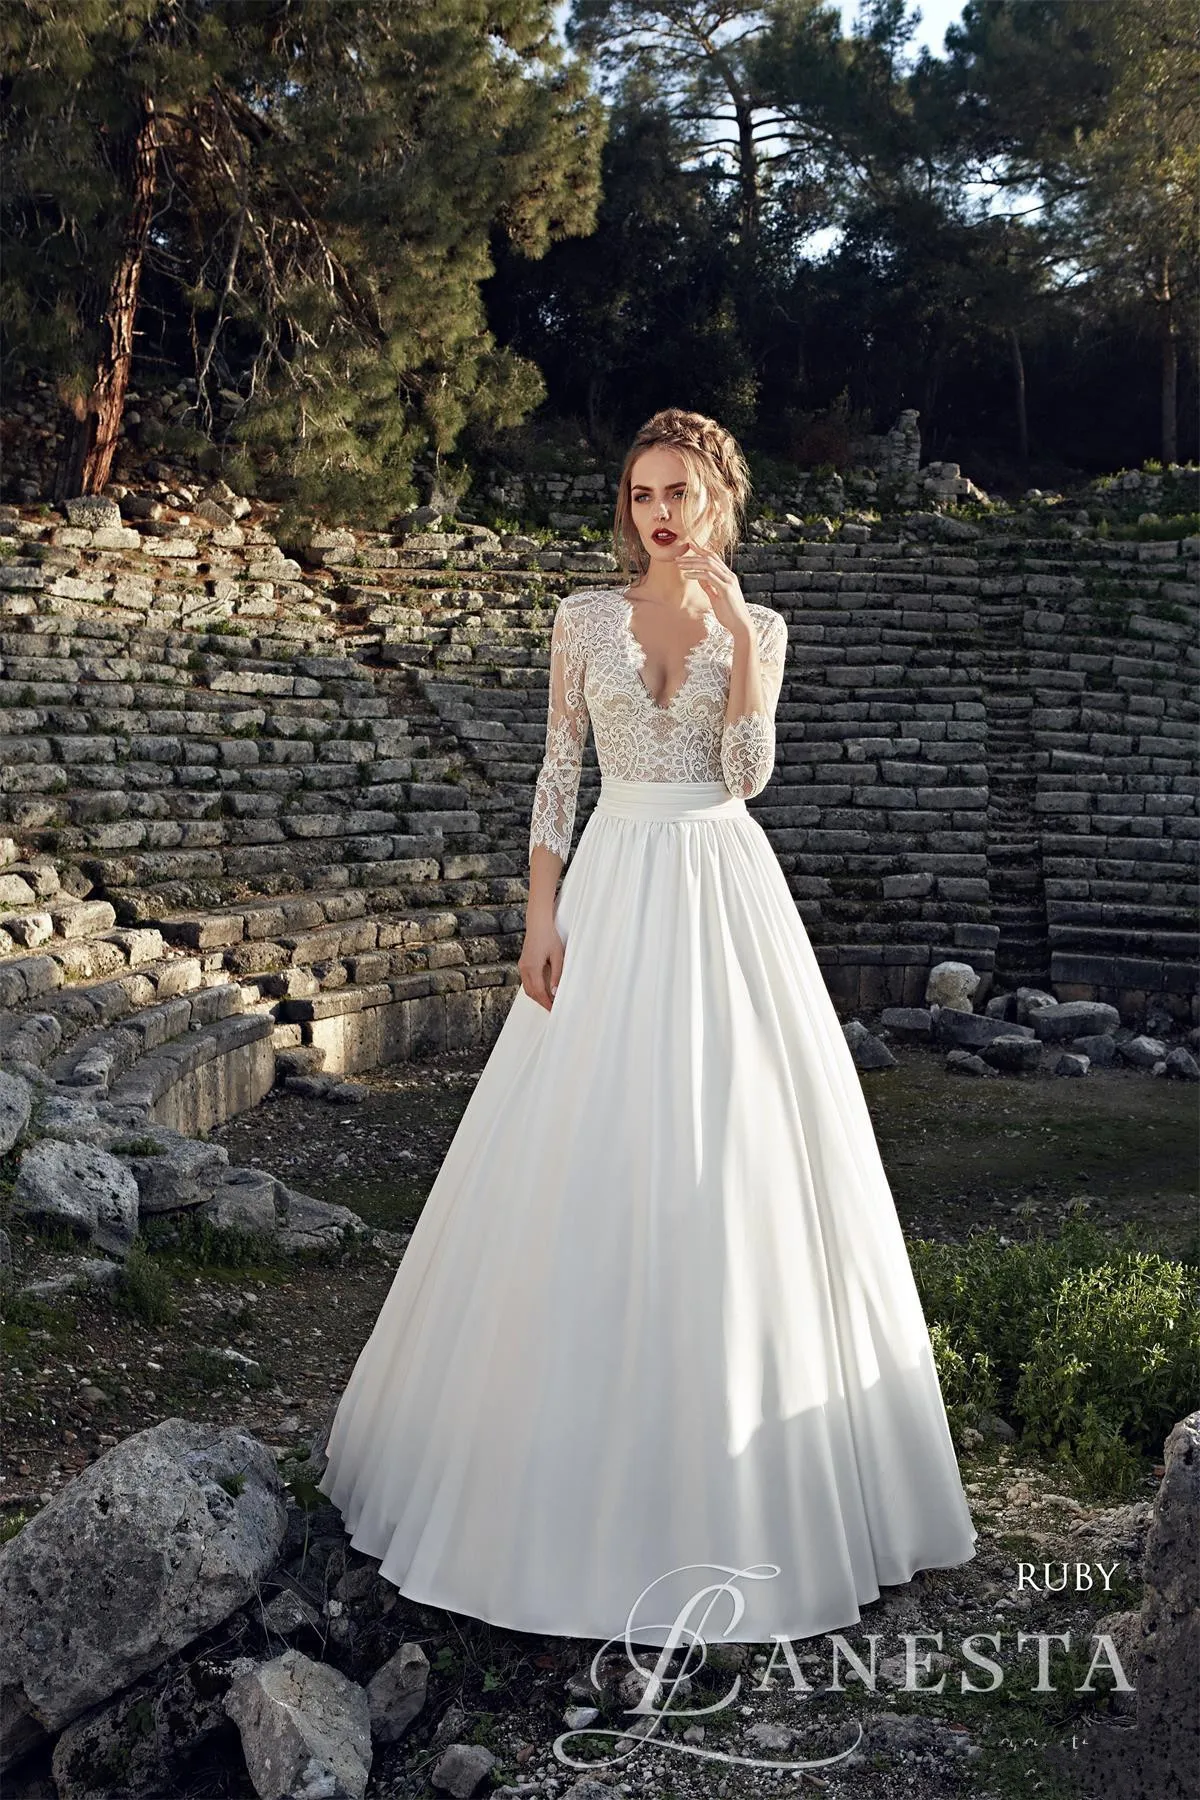 Latest Wedding Gowns For Your Weddings - Weddings On Budget